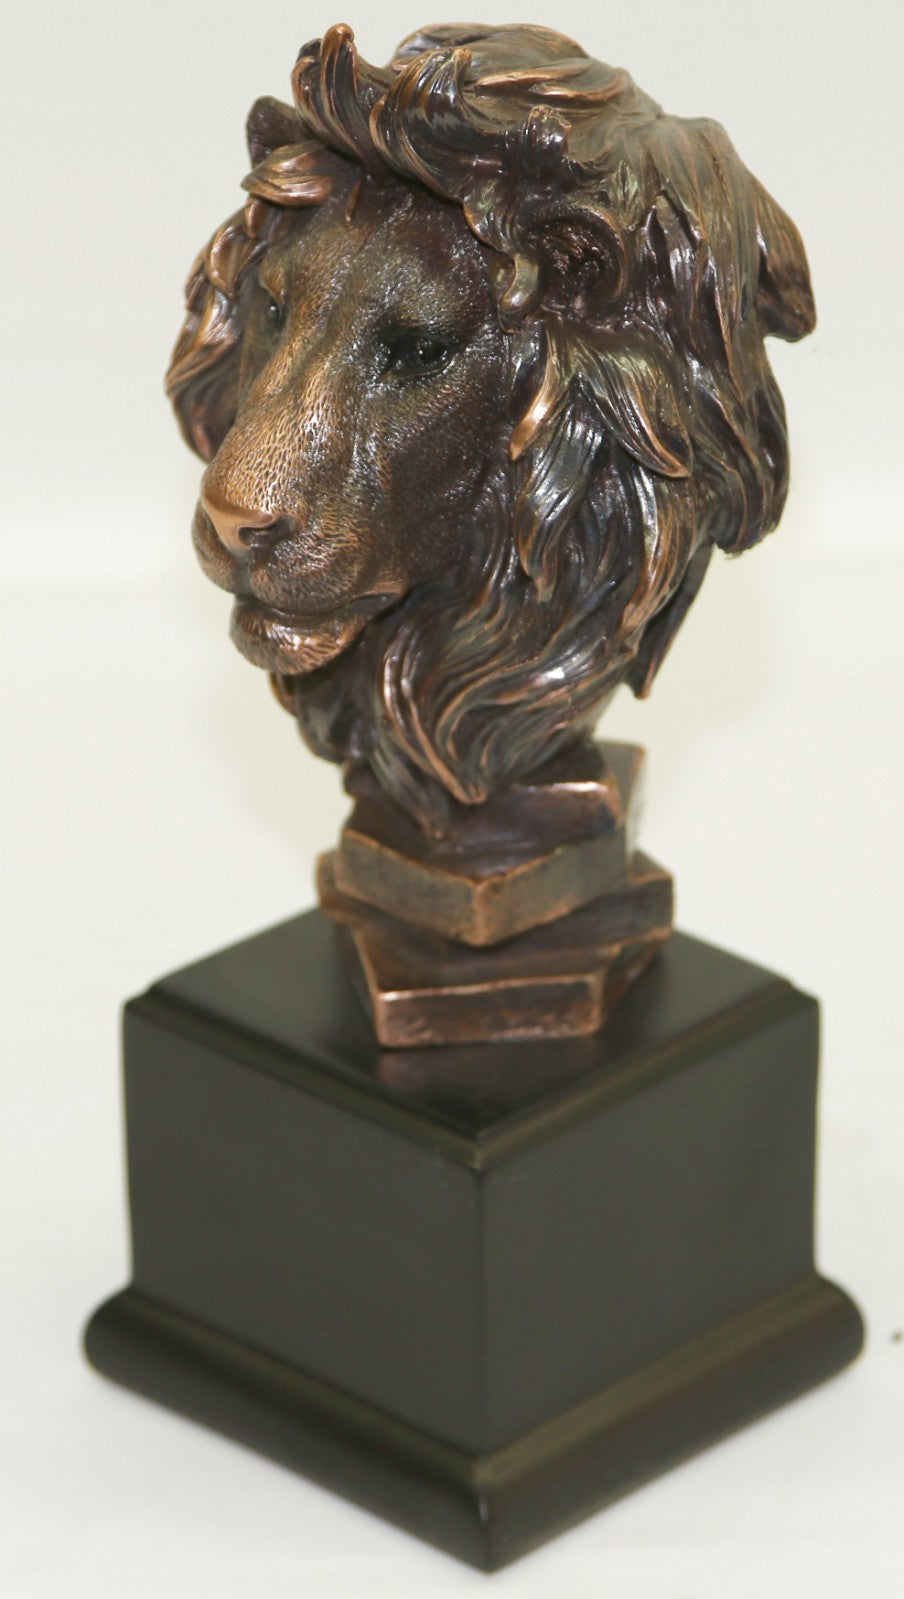 NEW Handcrafted Large LION Head Bust Plinth Mounted Animal Sculpture Art Statue